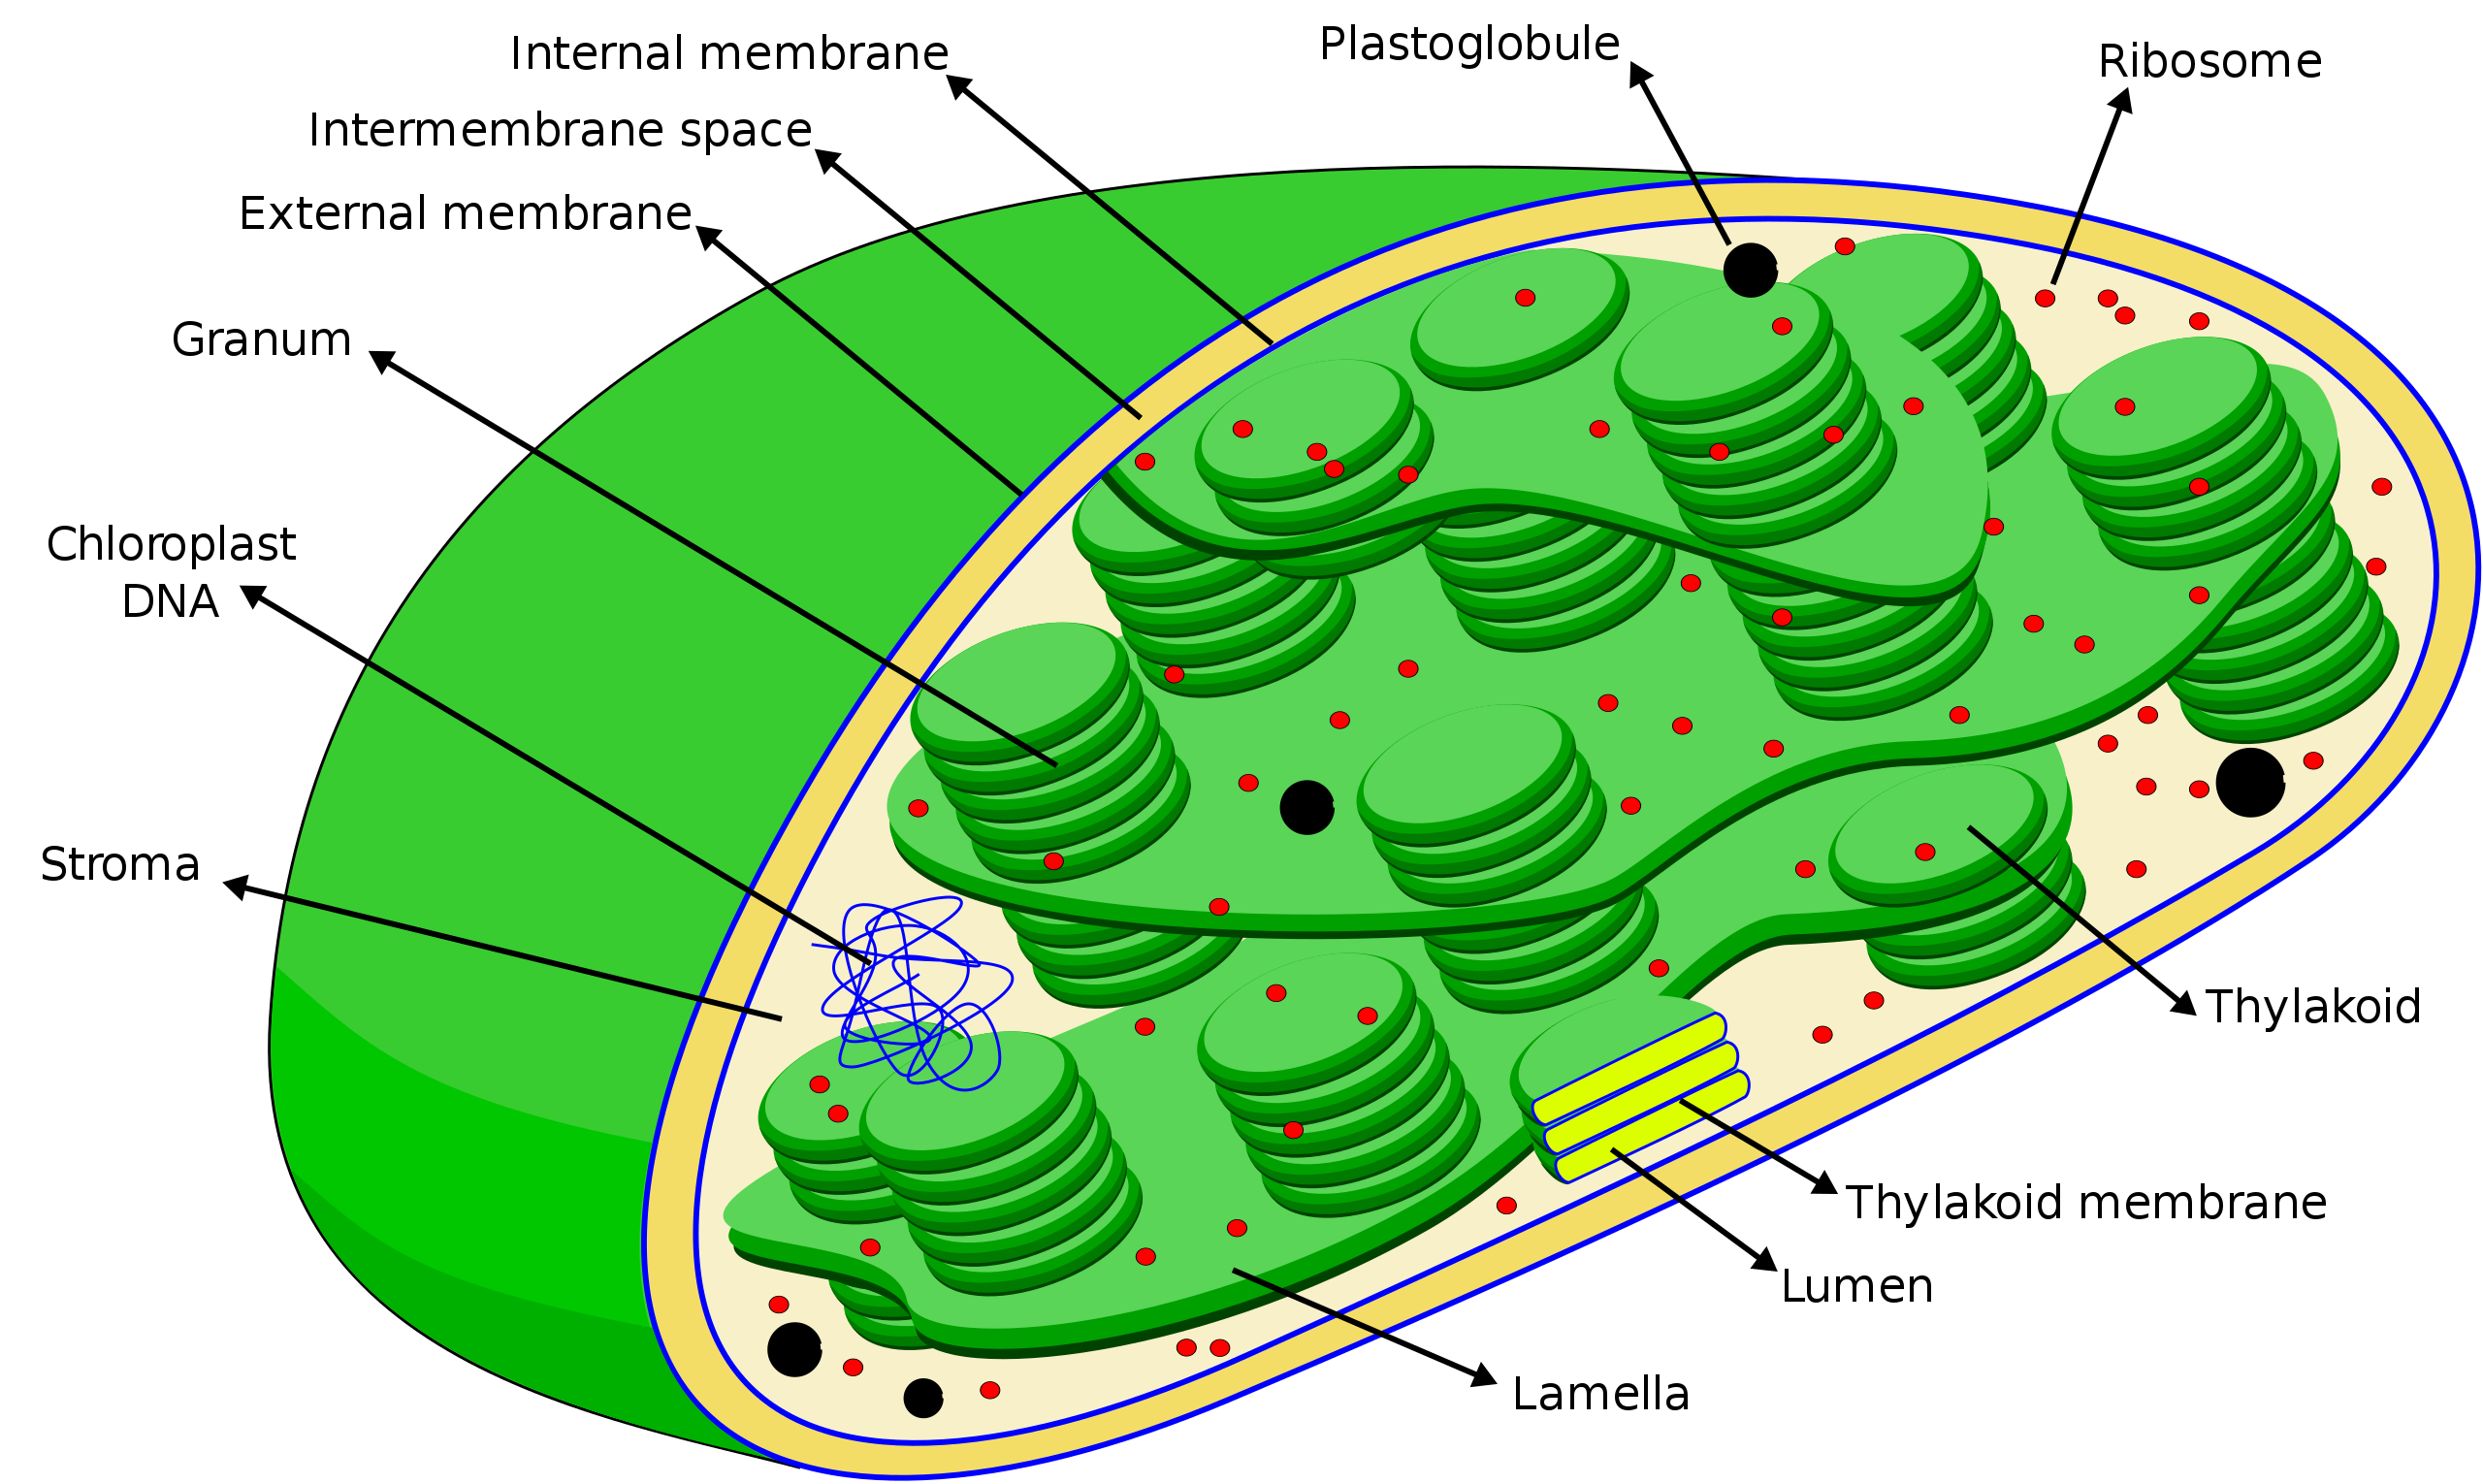 Chloroplast with labeled parts.